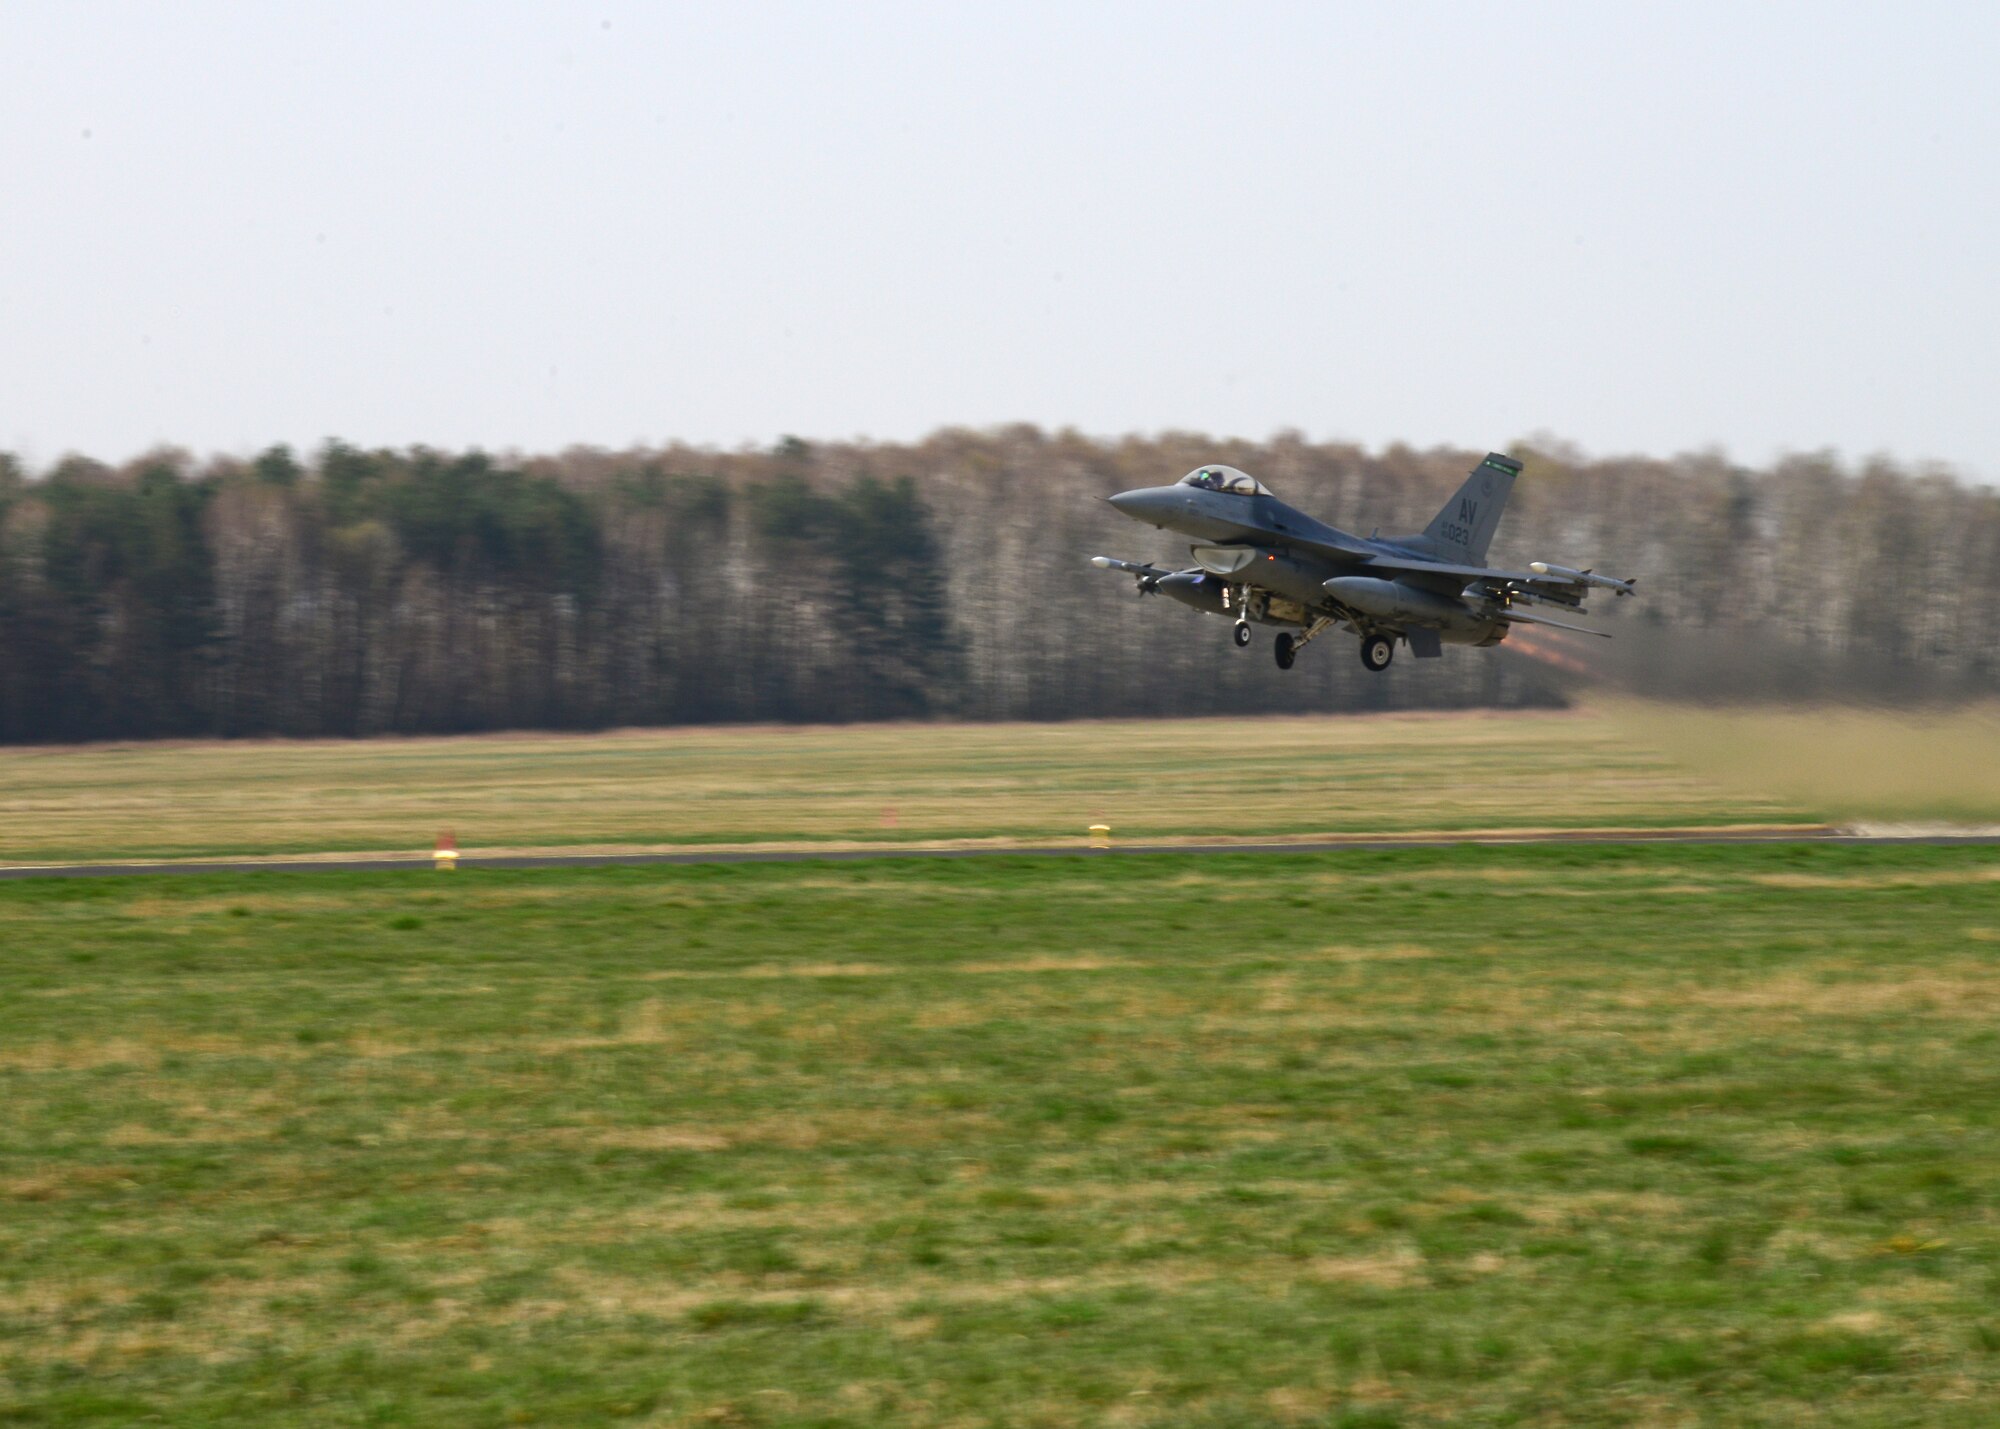 A 555th Fighter Squadron F-16 Fighting Falcon fighter aircraft from Aviano Air Base’s 31st Fighter Wing takes off for a joint-theater training mission with Polish air forces, April 1, 2014, from Łask Air Base, Poland. Poland continues to build its relationship with the U.S. as both nations' air forces integrate their capabilities through training sorties in a joint theater capacity for the first time since the arrival of 31st Fighter Wing aircraft and personnel. (U.S. Air Force photo/Airman 1st Class Ryan Conroy/Released)  